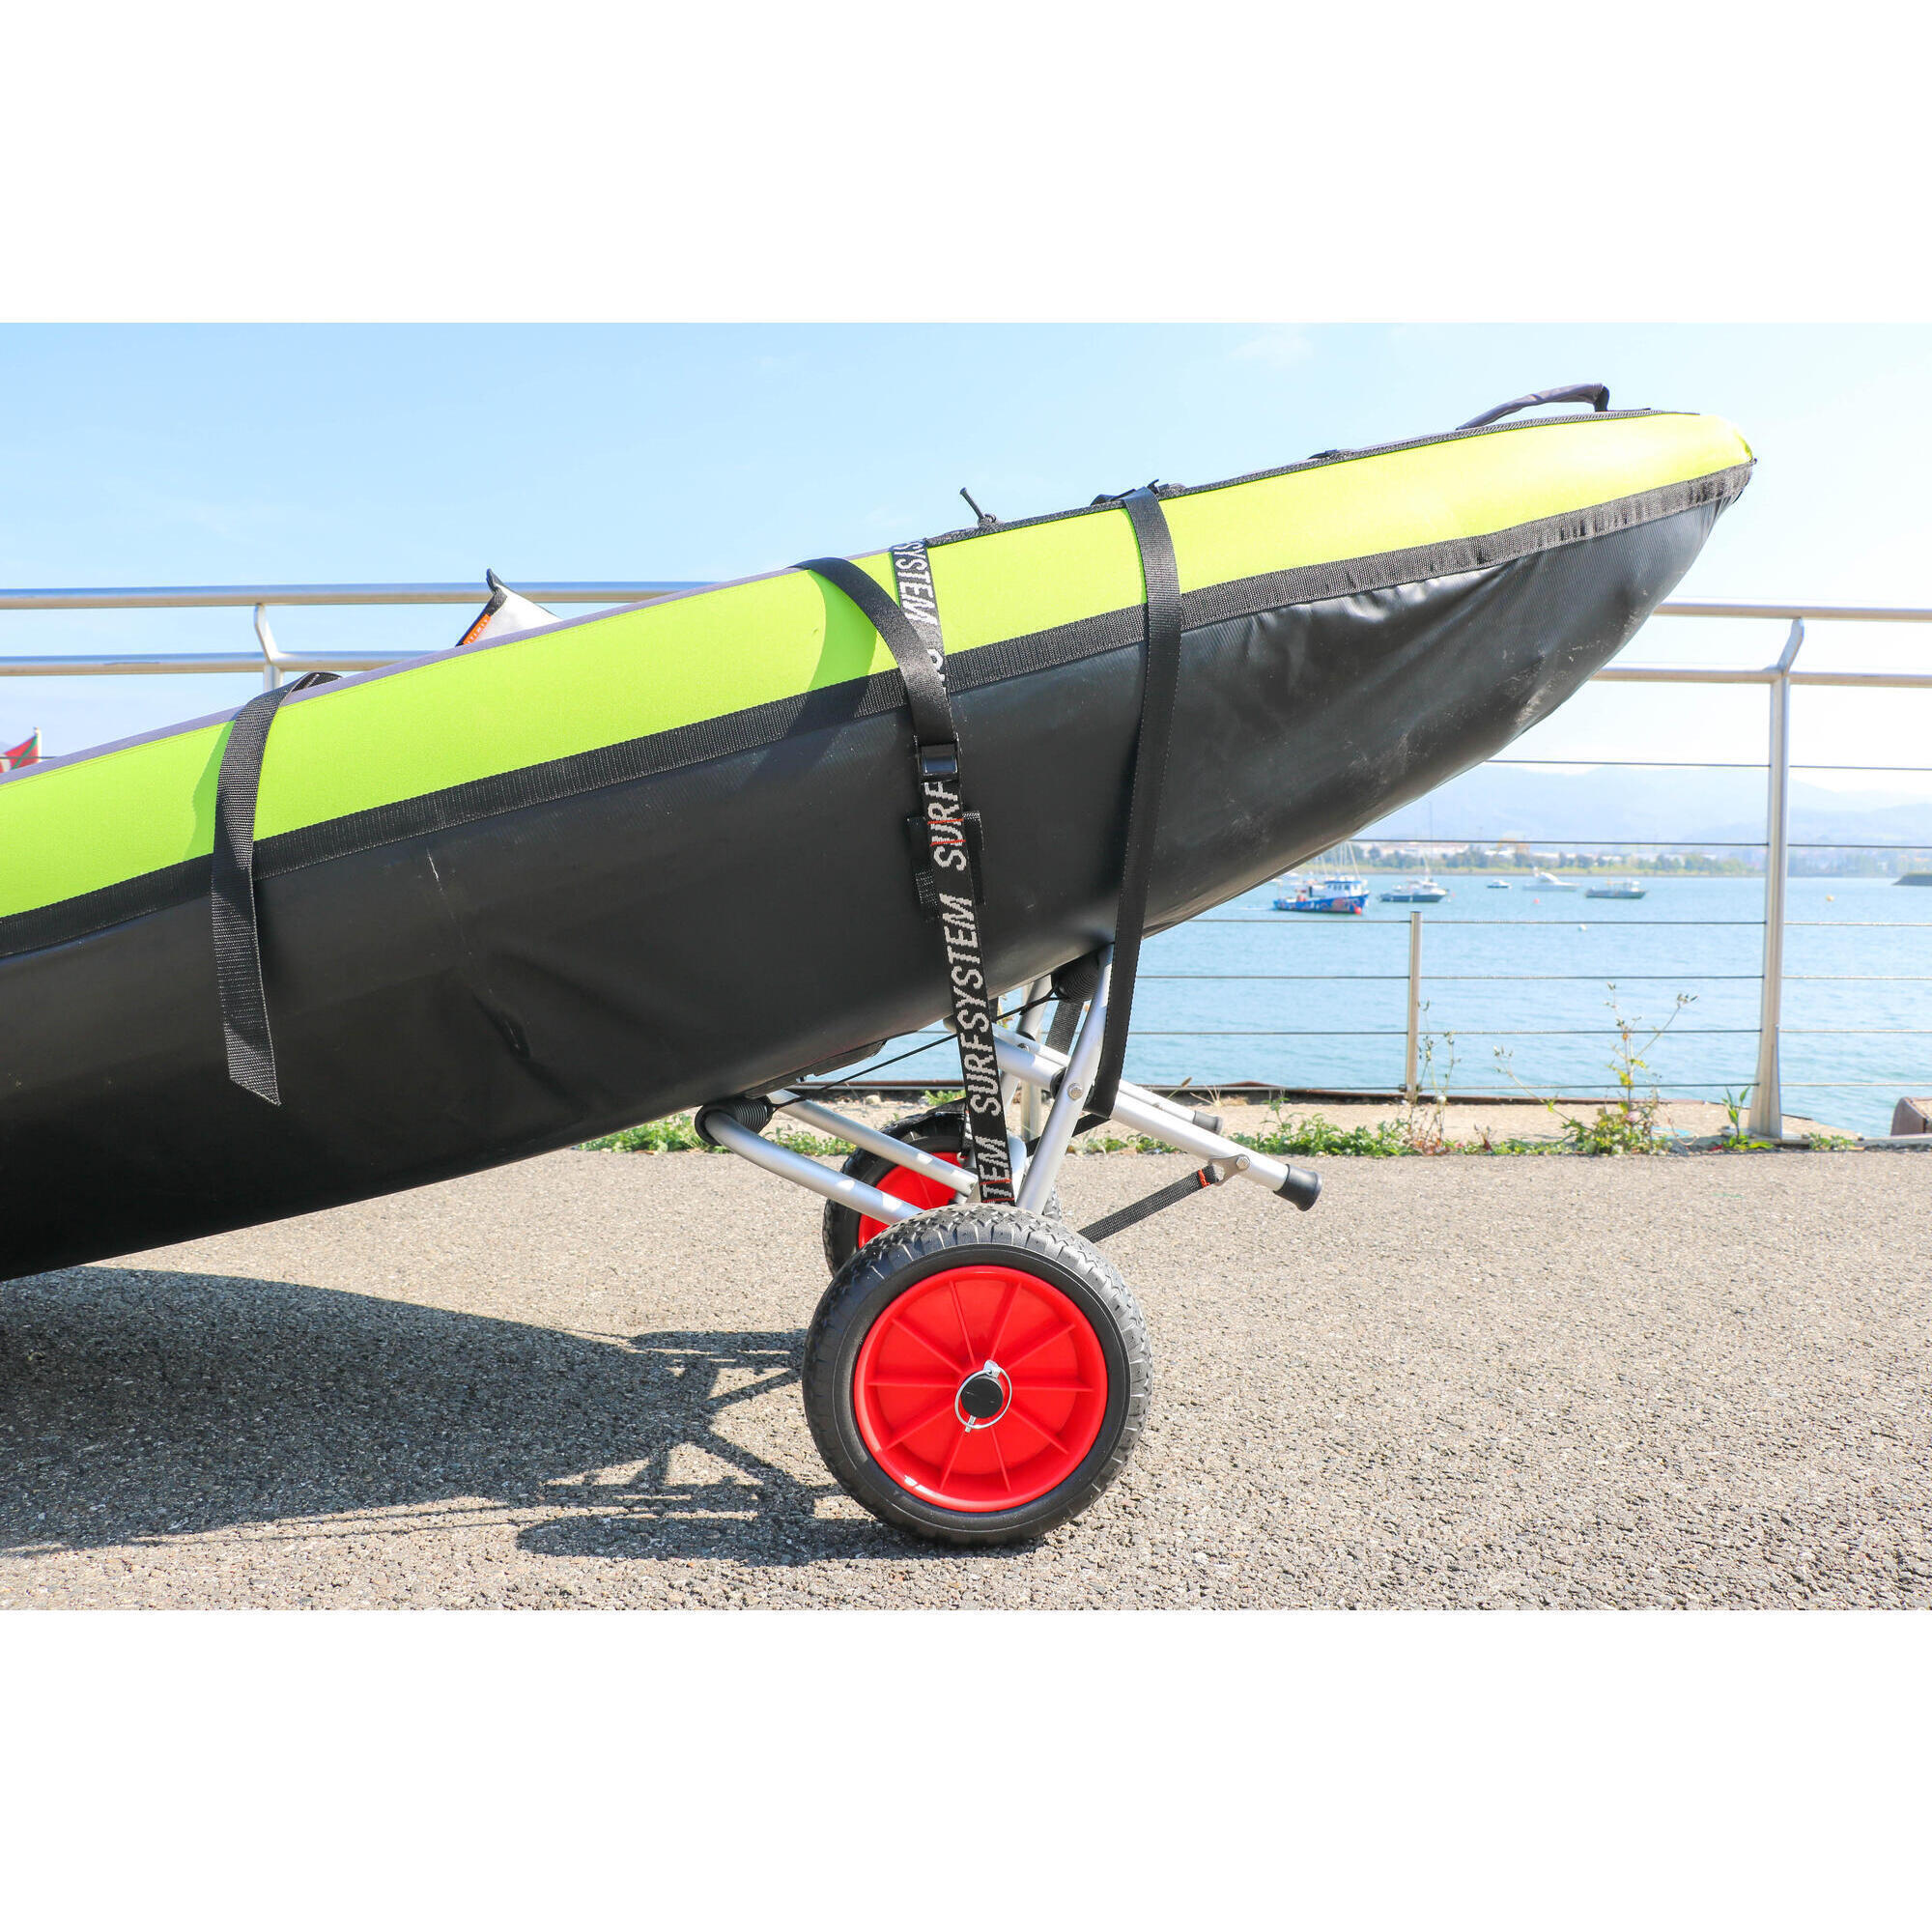 Surf System travel trolley for canoe/kayaks, SUPs or surfboards 2/4